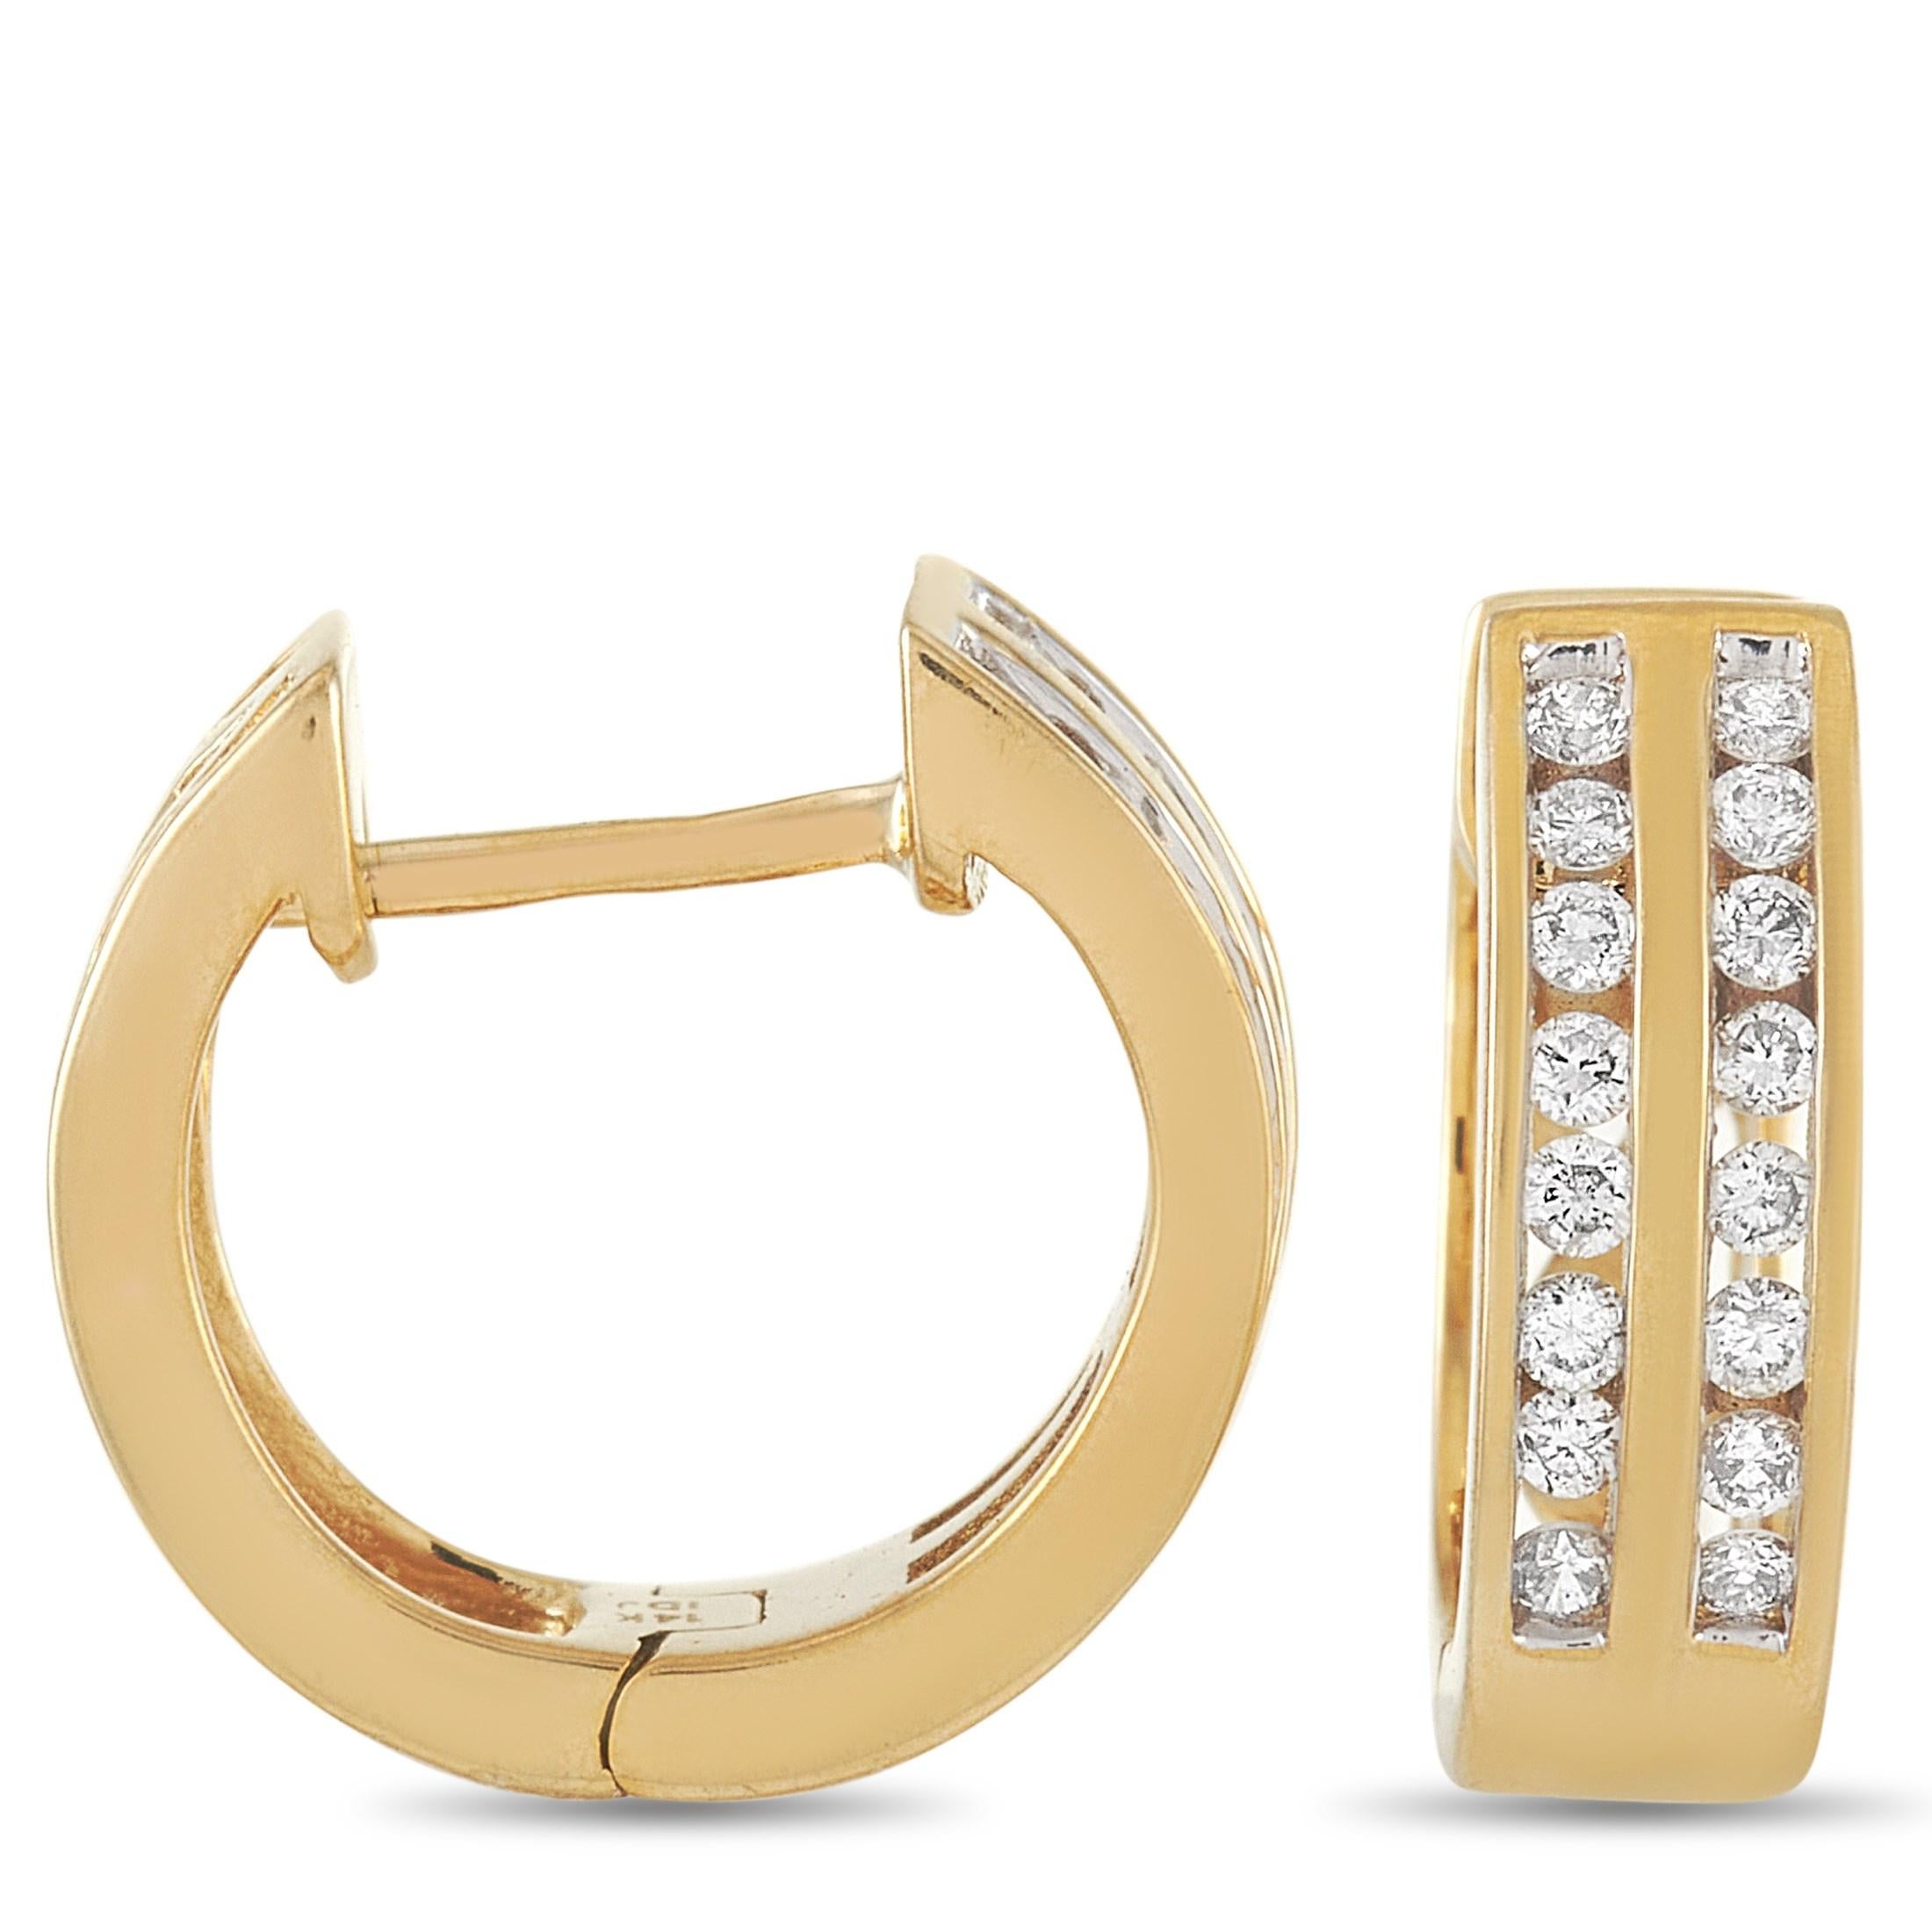 These elegant hoop earrings have an eye-catching, breathtaking sense of style. Each hoop measures 0.5 inches and pairs a double row of diamonds with a lovely lattice design at the back. Made from 14K Yellow Gold and featuring a total weight of 0.25